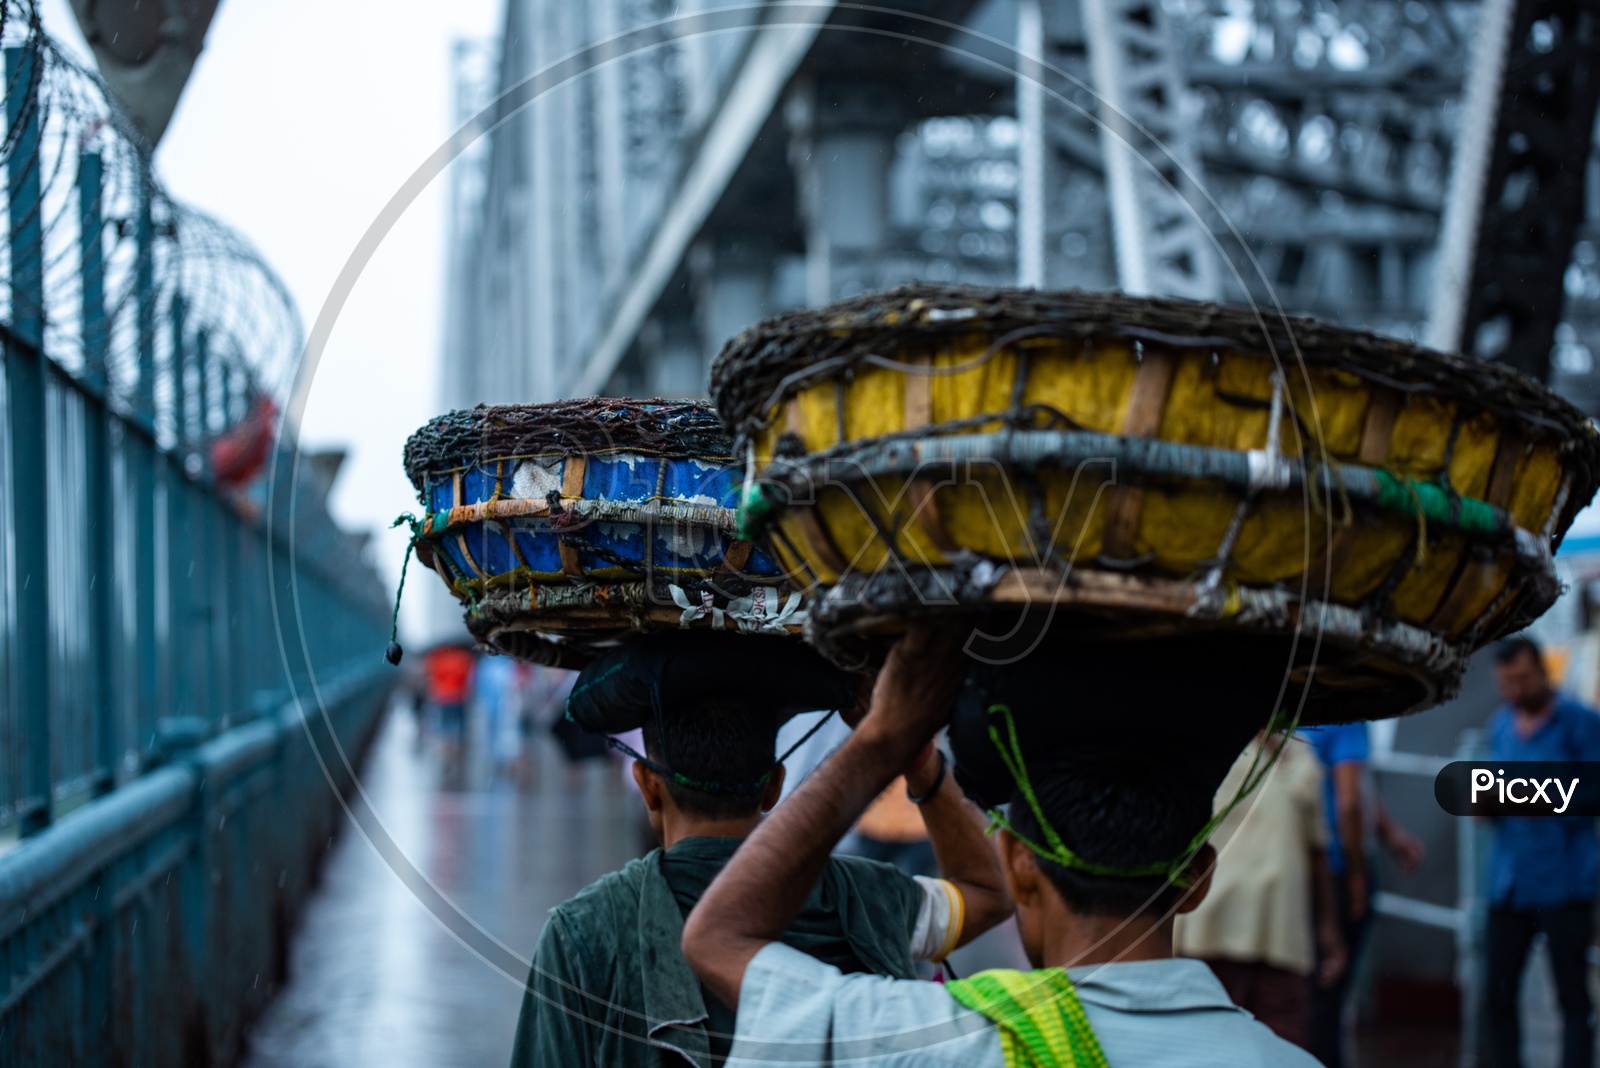 Vendors Carrying The Baskets On Their Heads  At Howrah Bridge